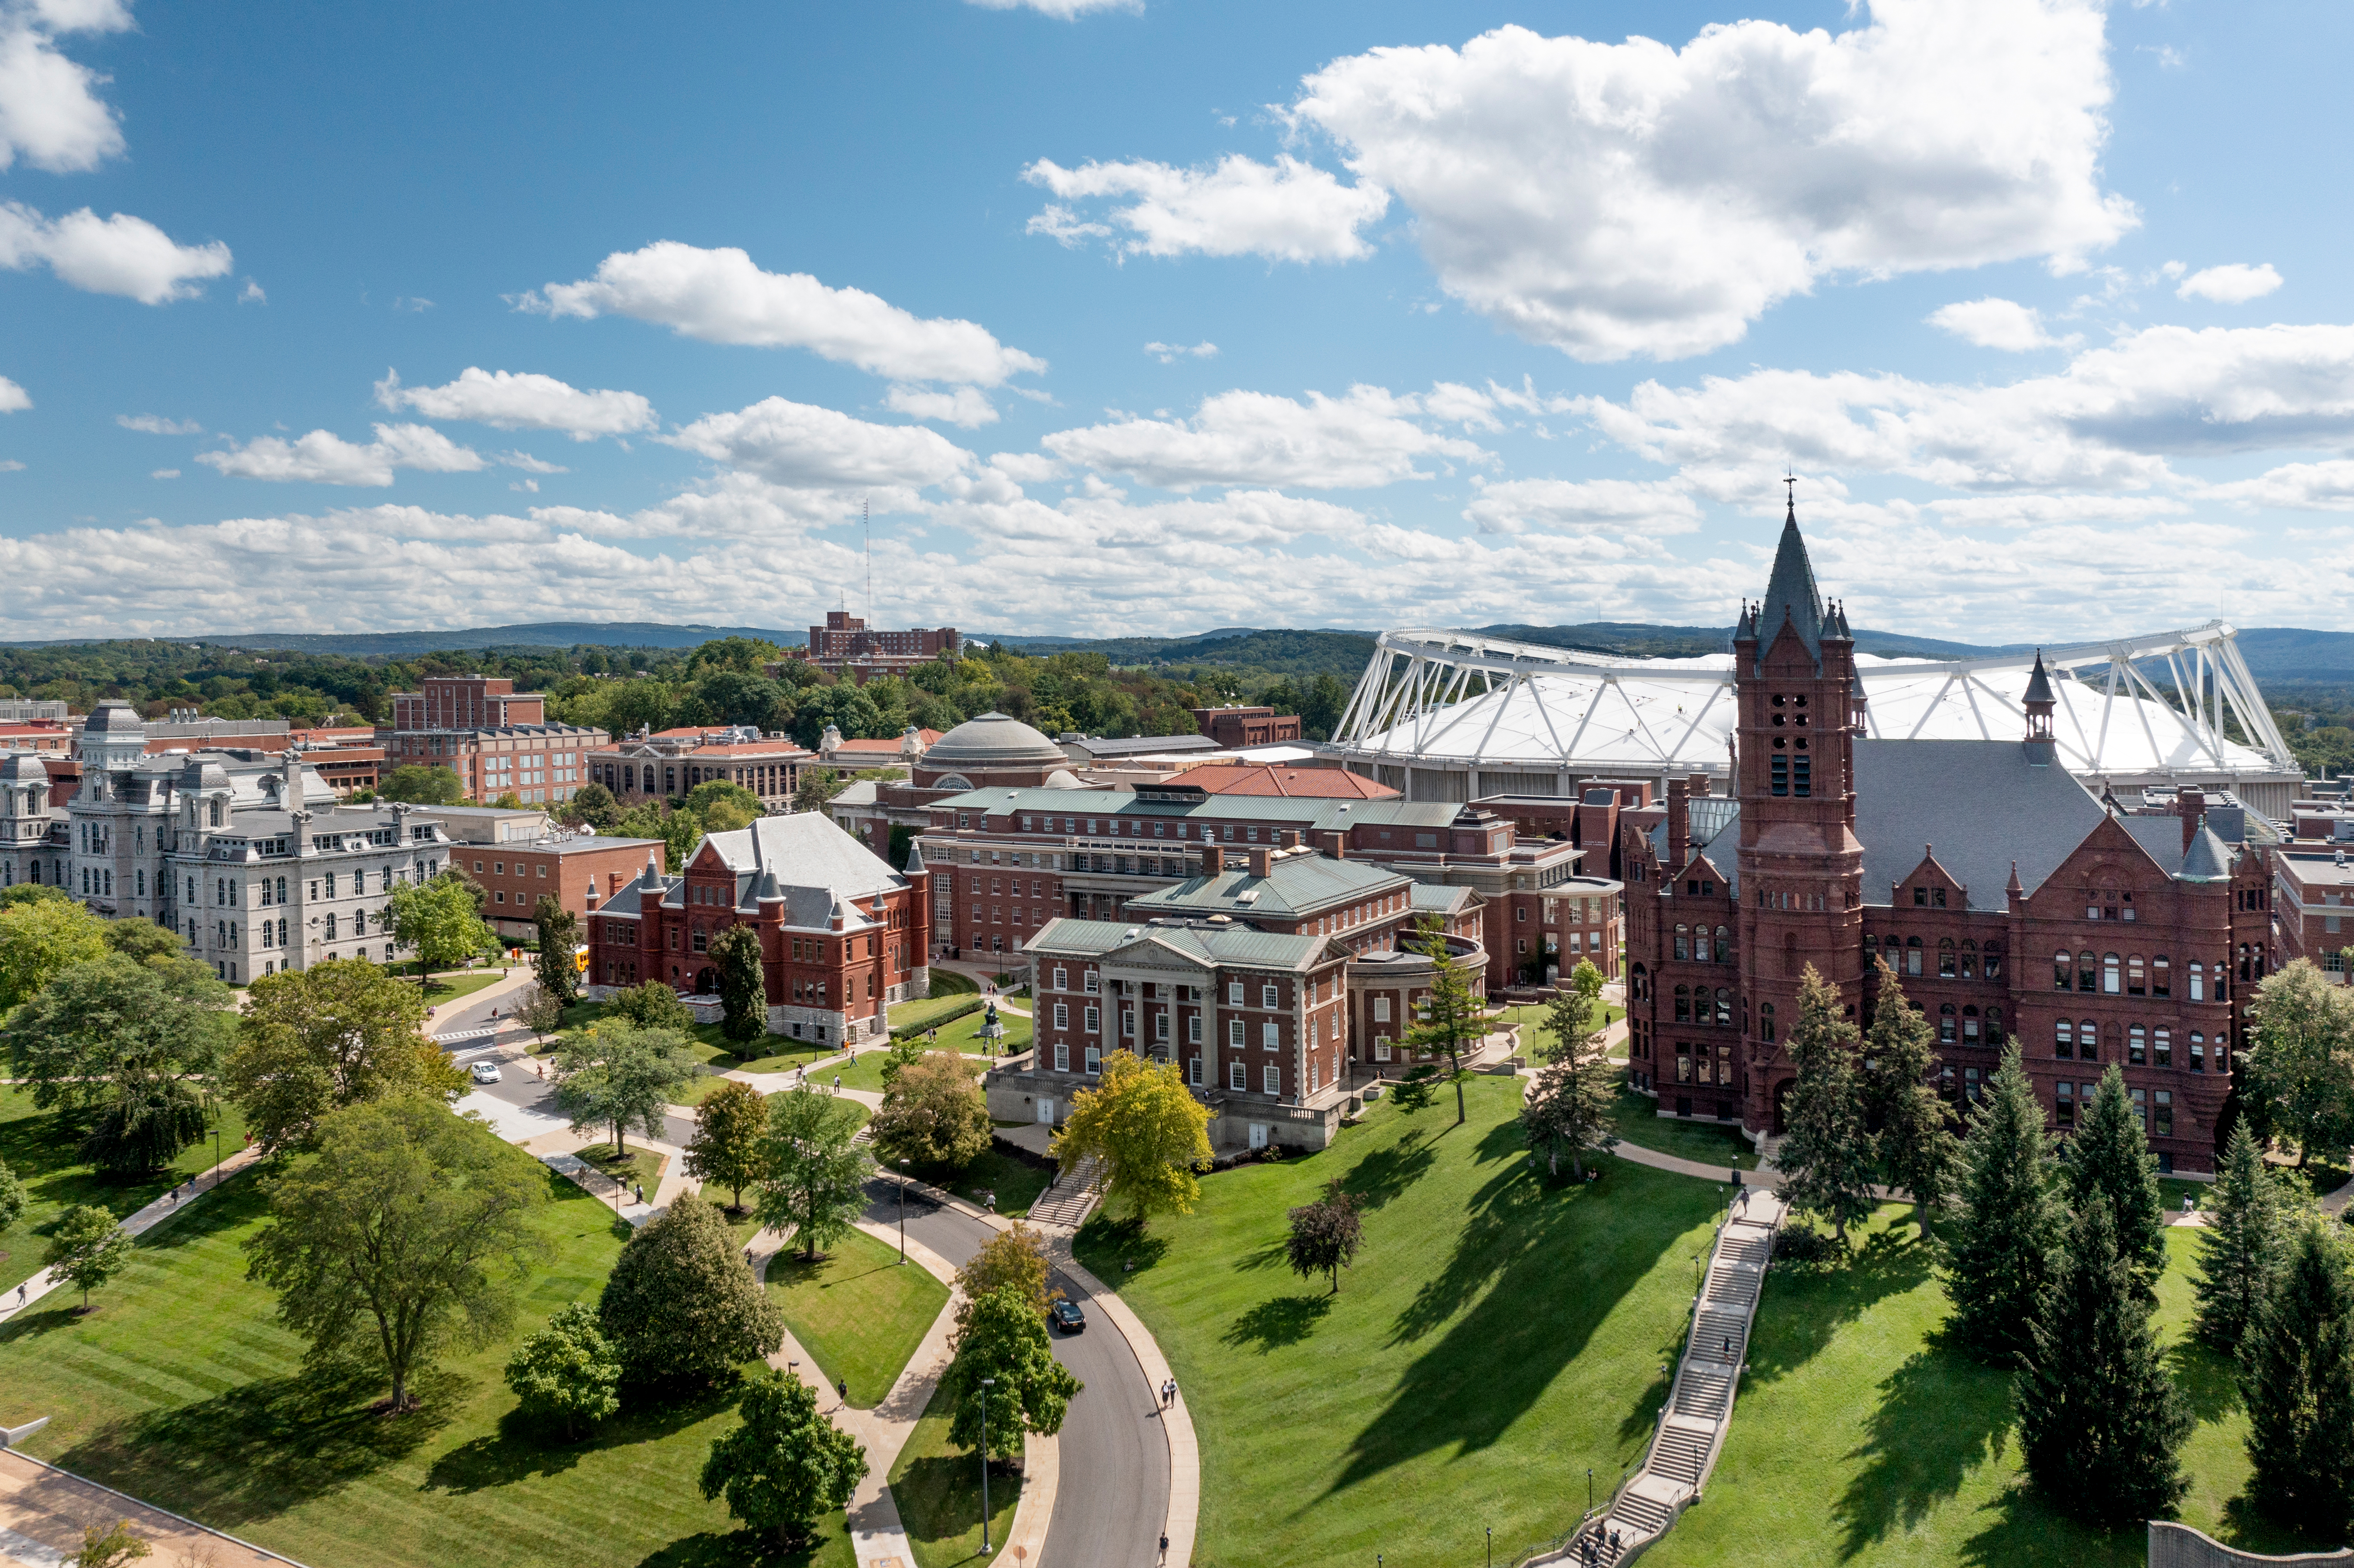 Syracuse University Campus Arial View Picture